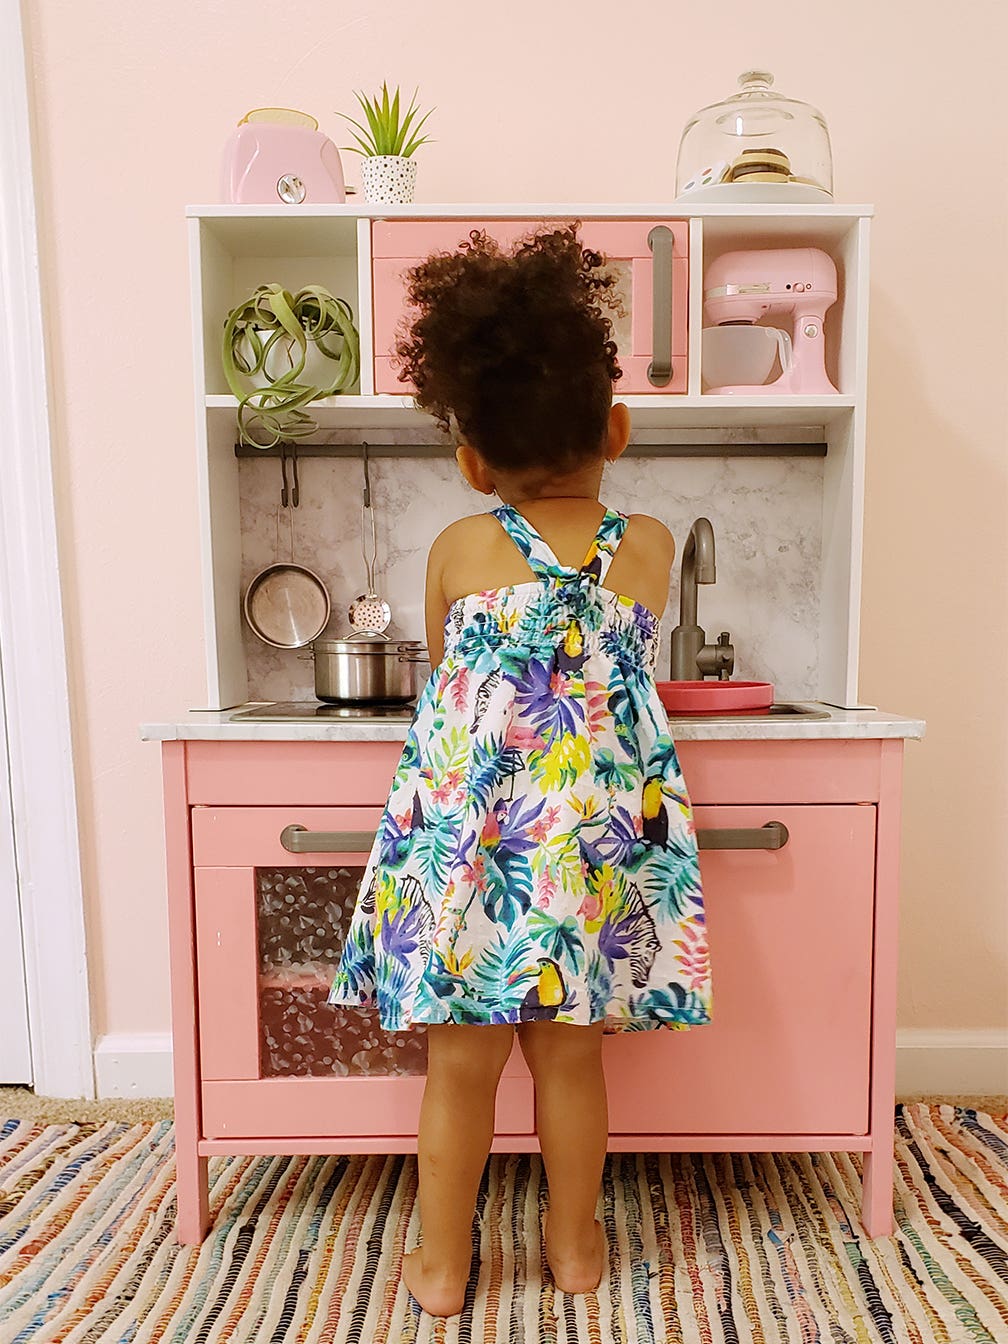 Toddler in front of pink play kitchen